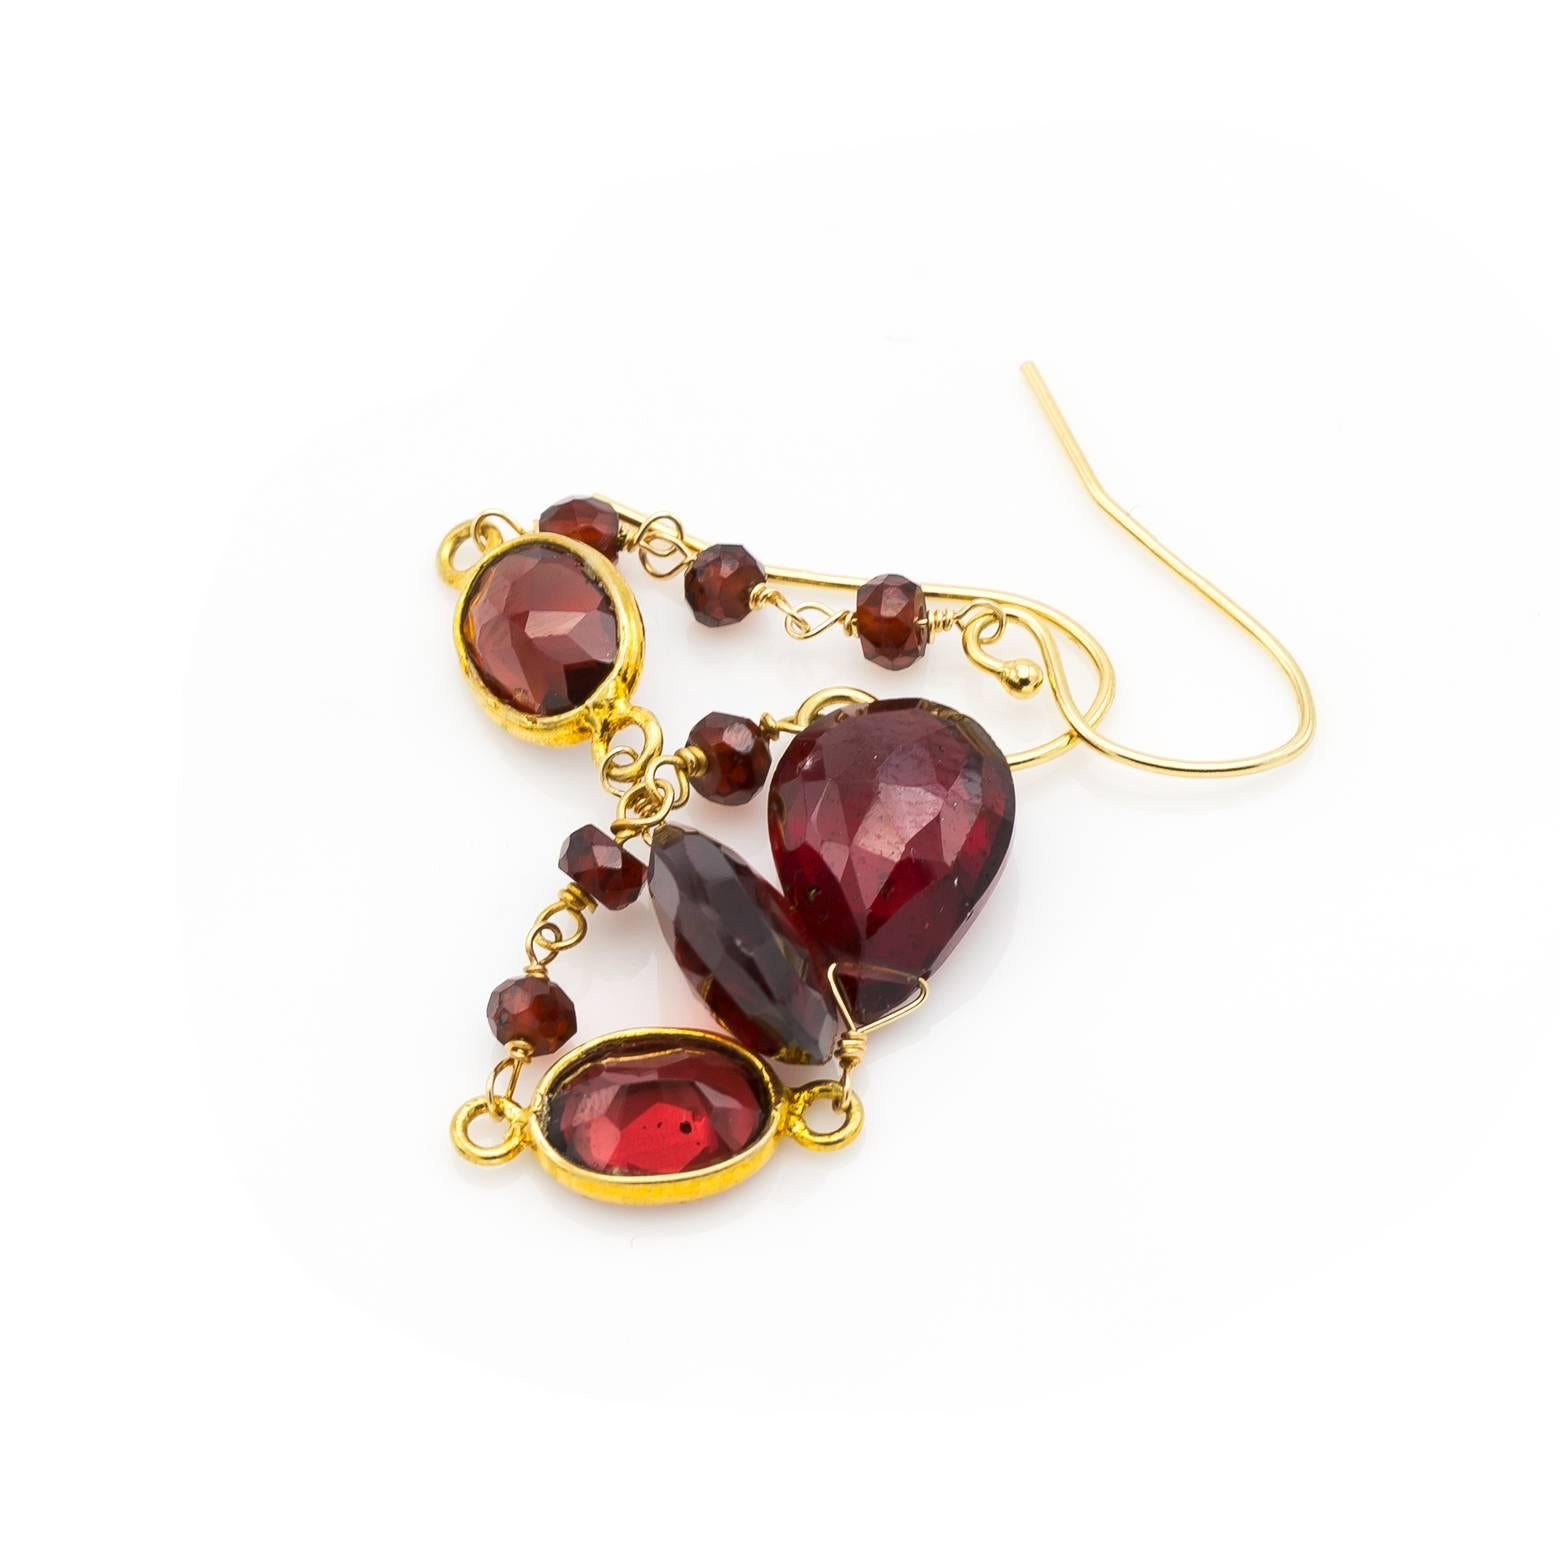 Faceted Garnet and Gold Dangling Earrings in a Tapered Design 1